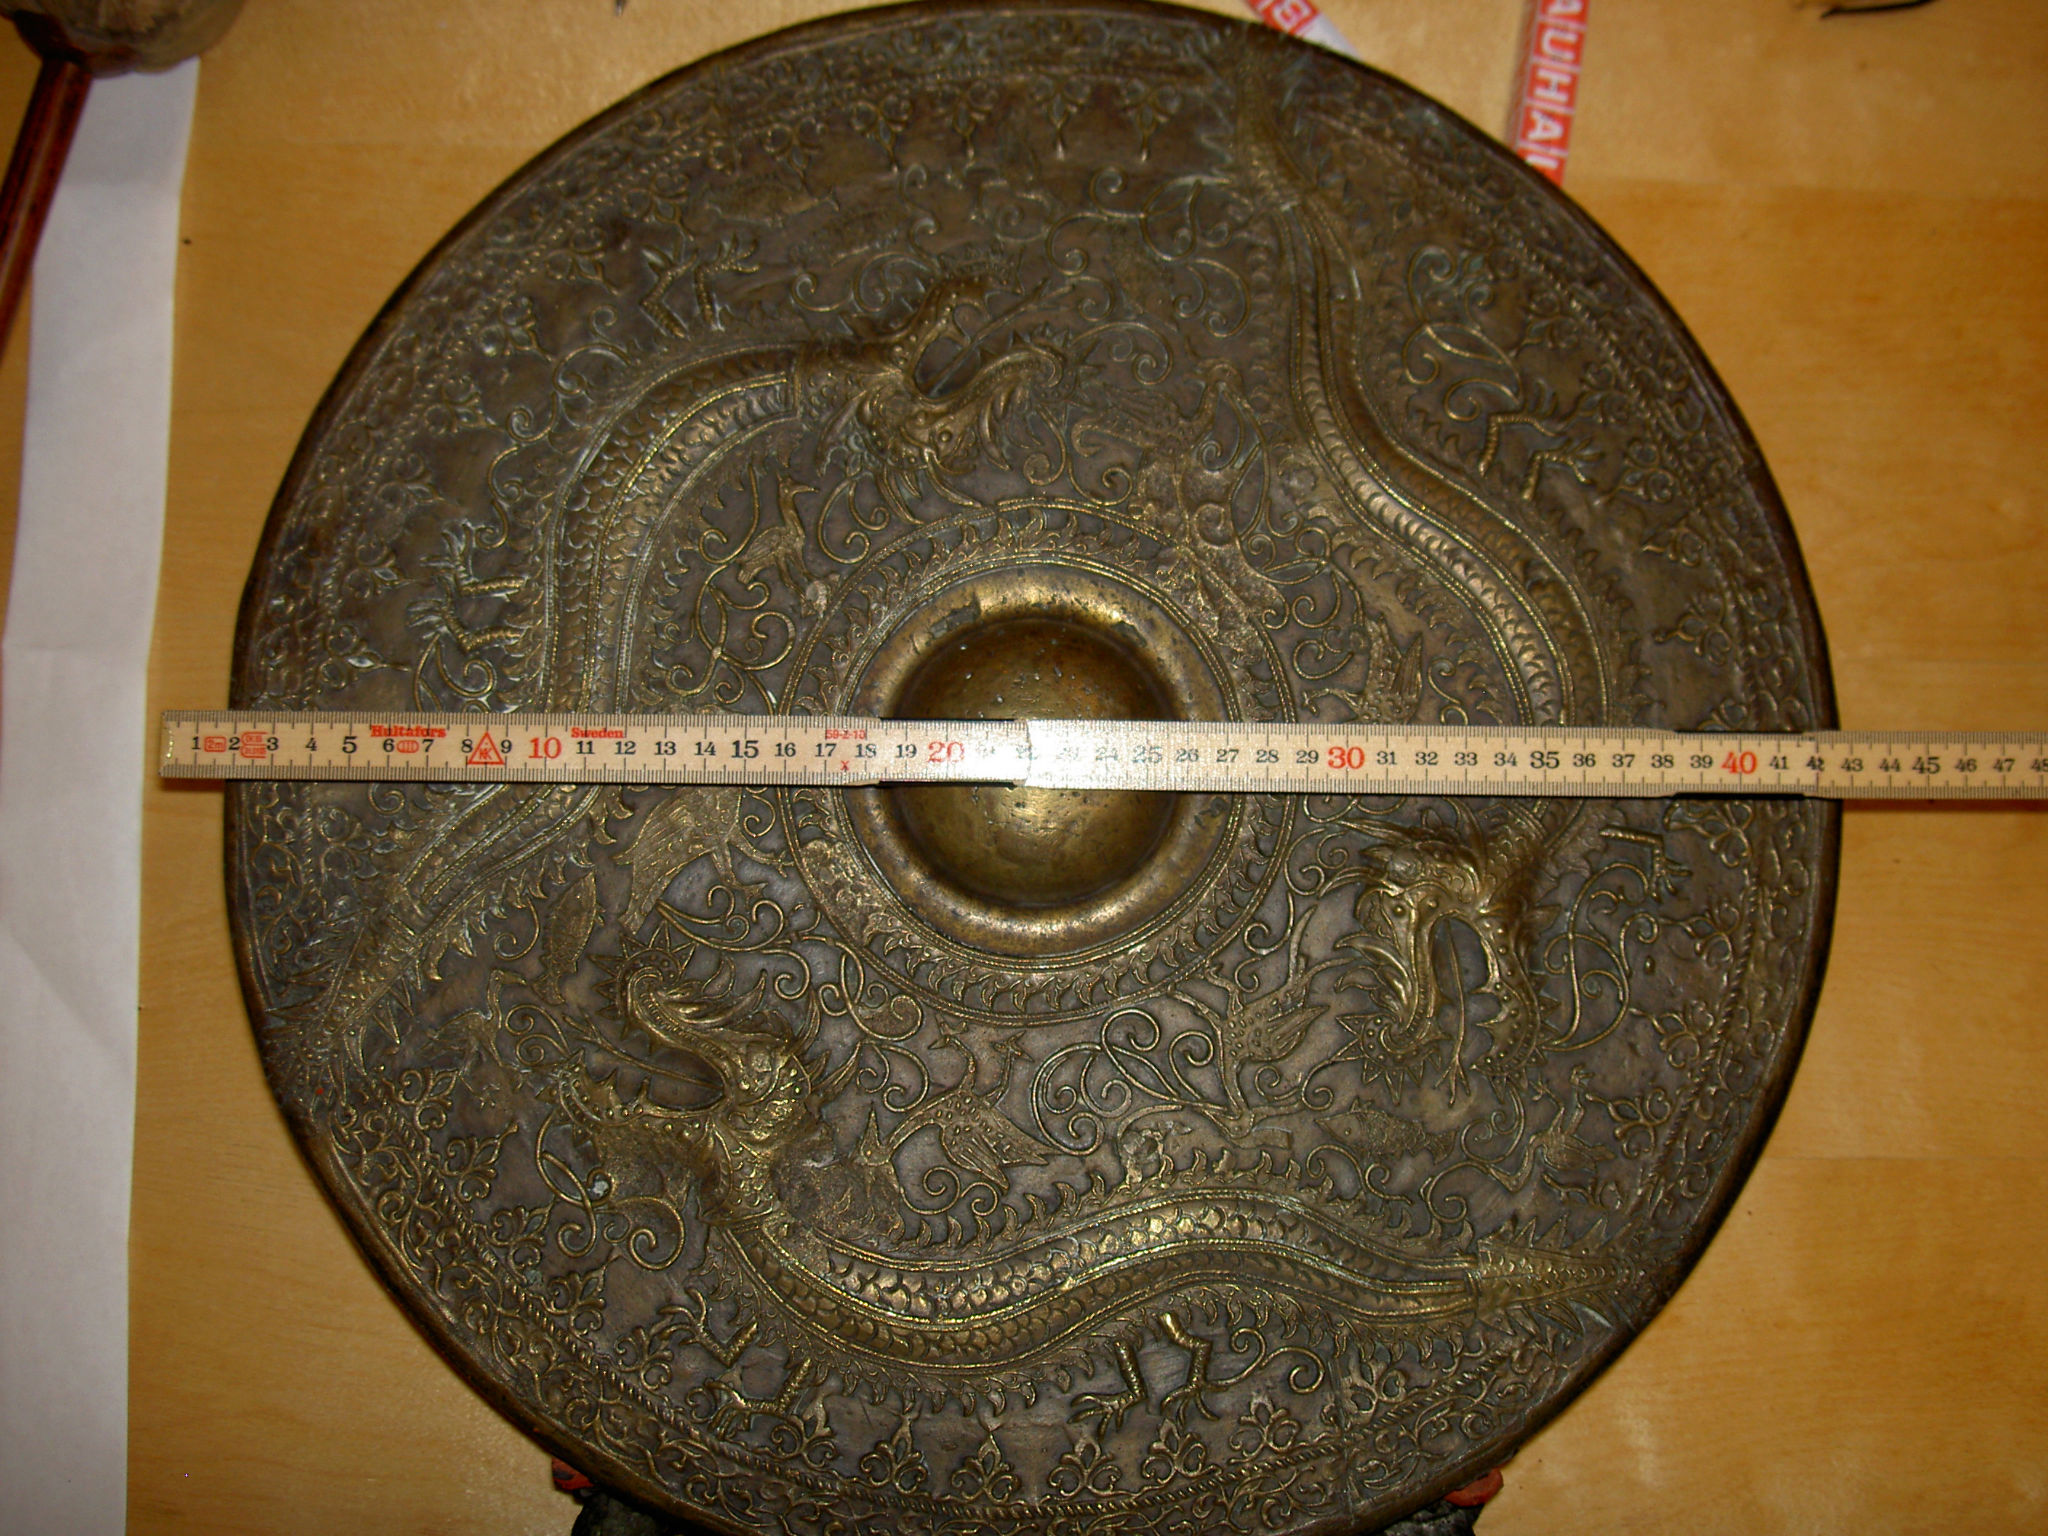 Gong Gong form 1700